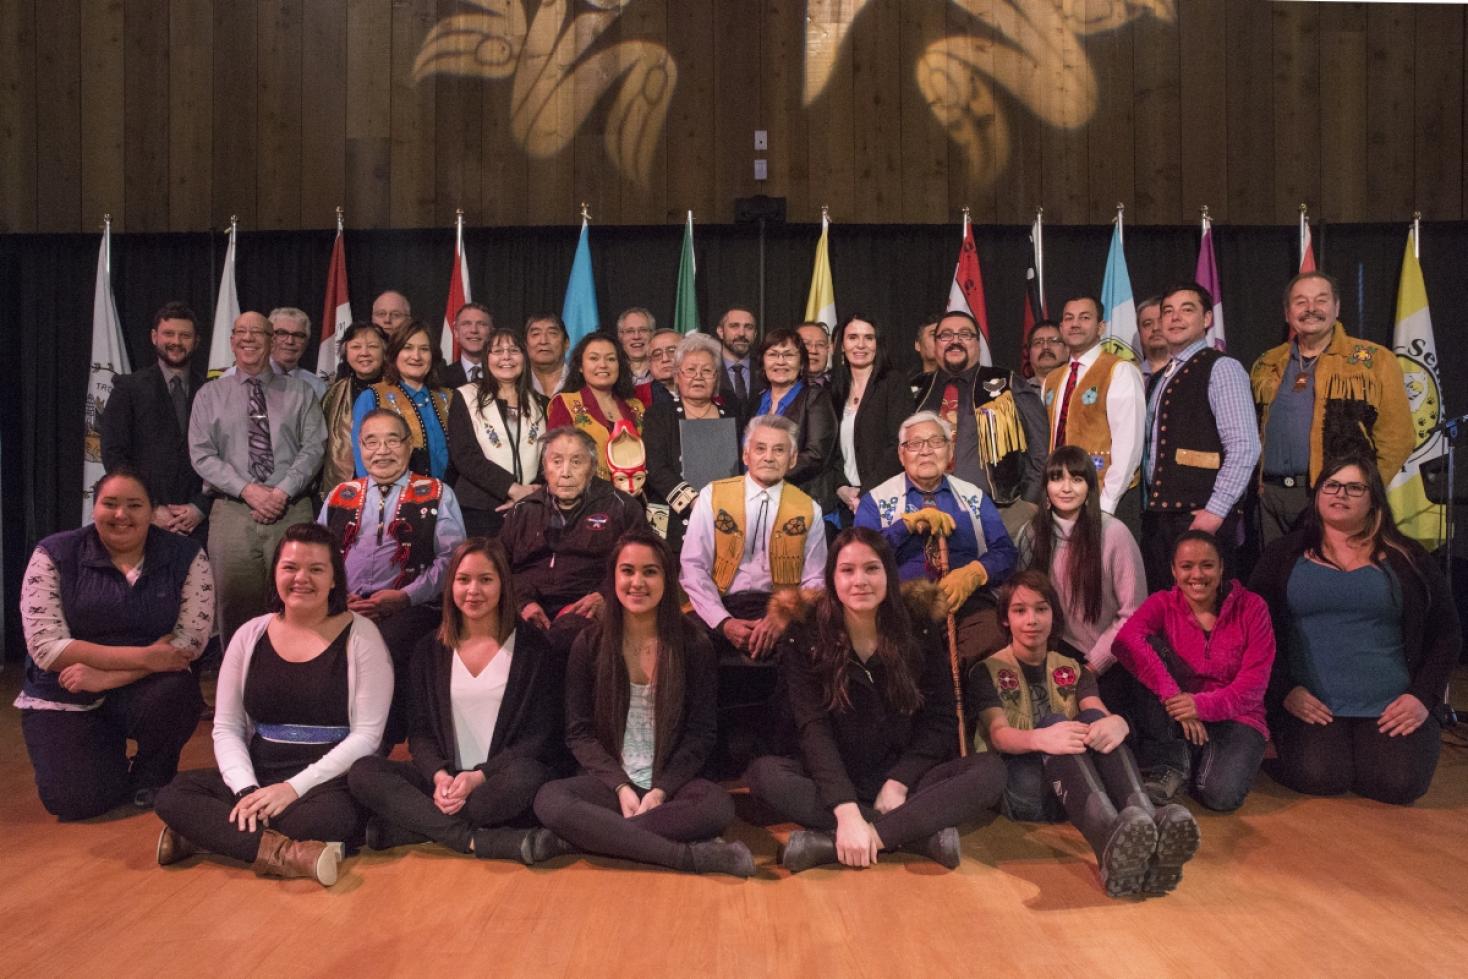 Elders and youth joined Yukon government and First Nation leaders at the Yukon Forum in January 2017. This Forum between the Yukon and First Nations governments was focused on reconciliation, collaboration and building a strong relationship between the Yukon and First Nation governments. 